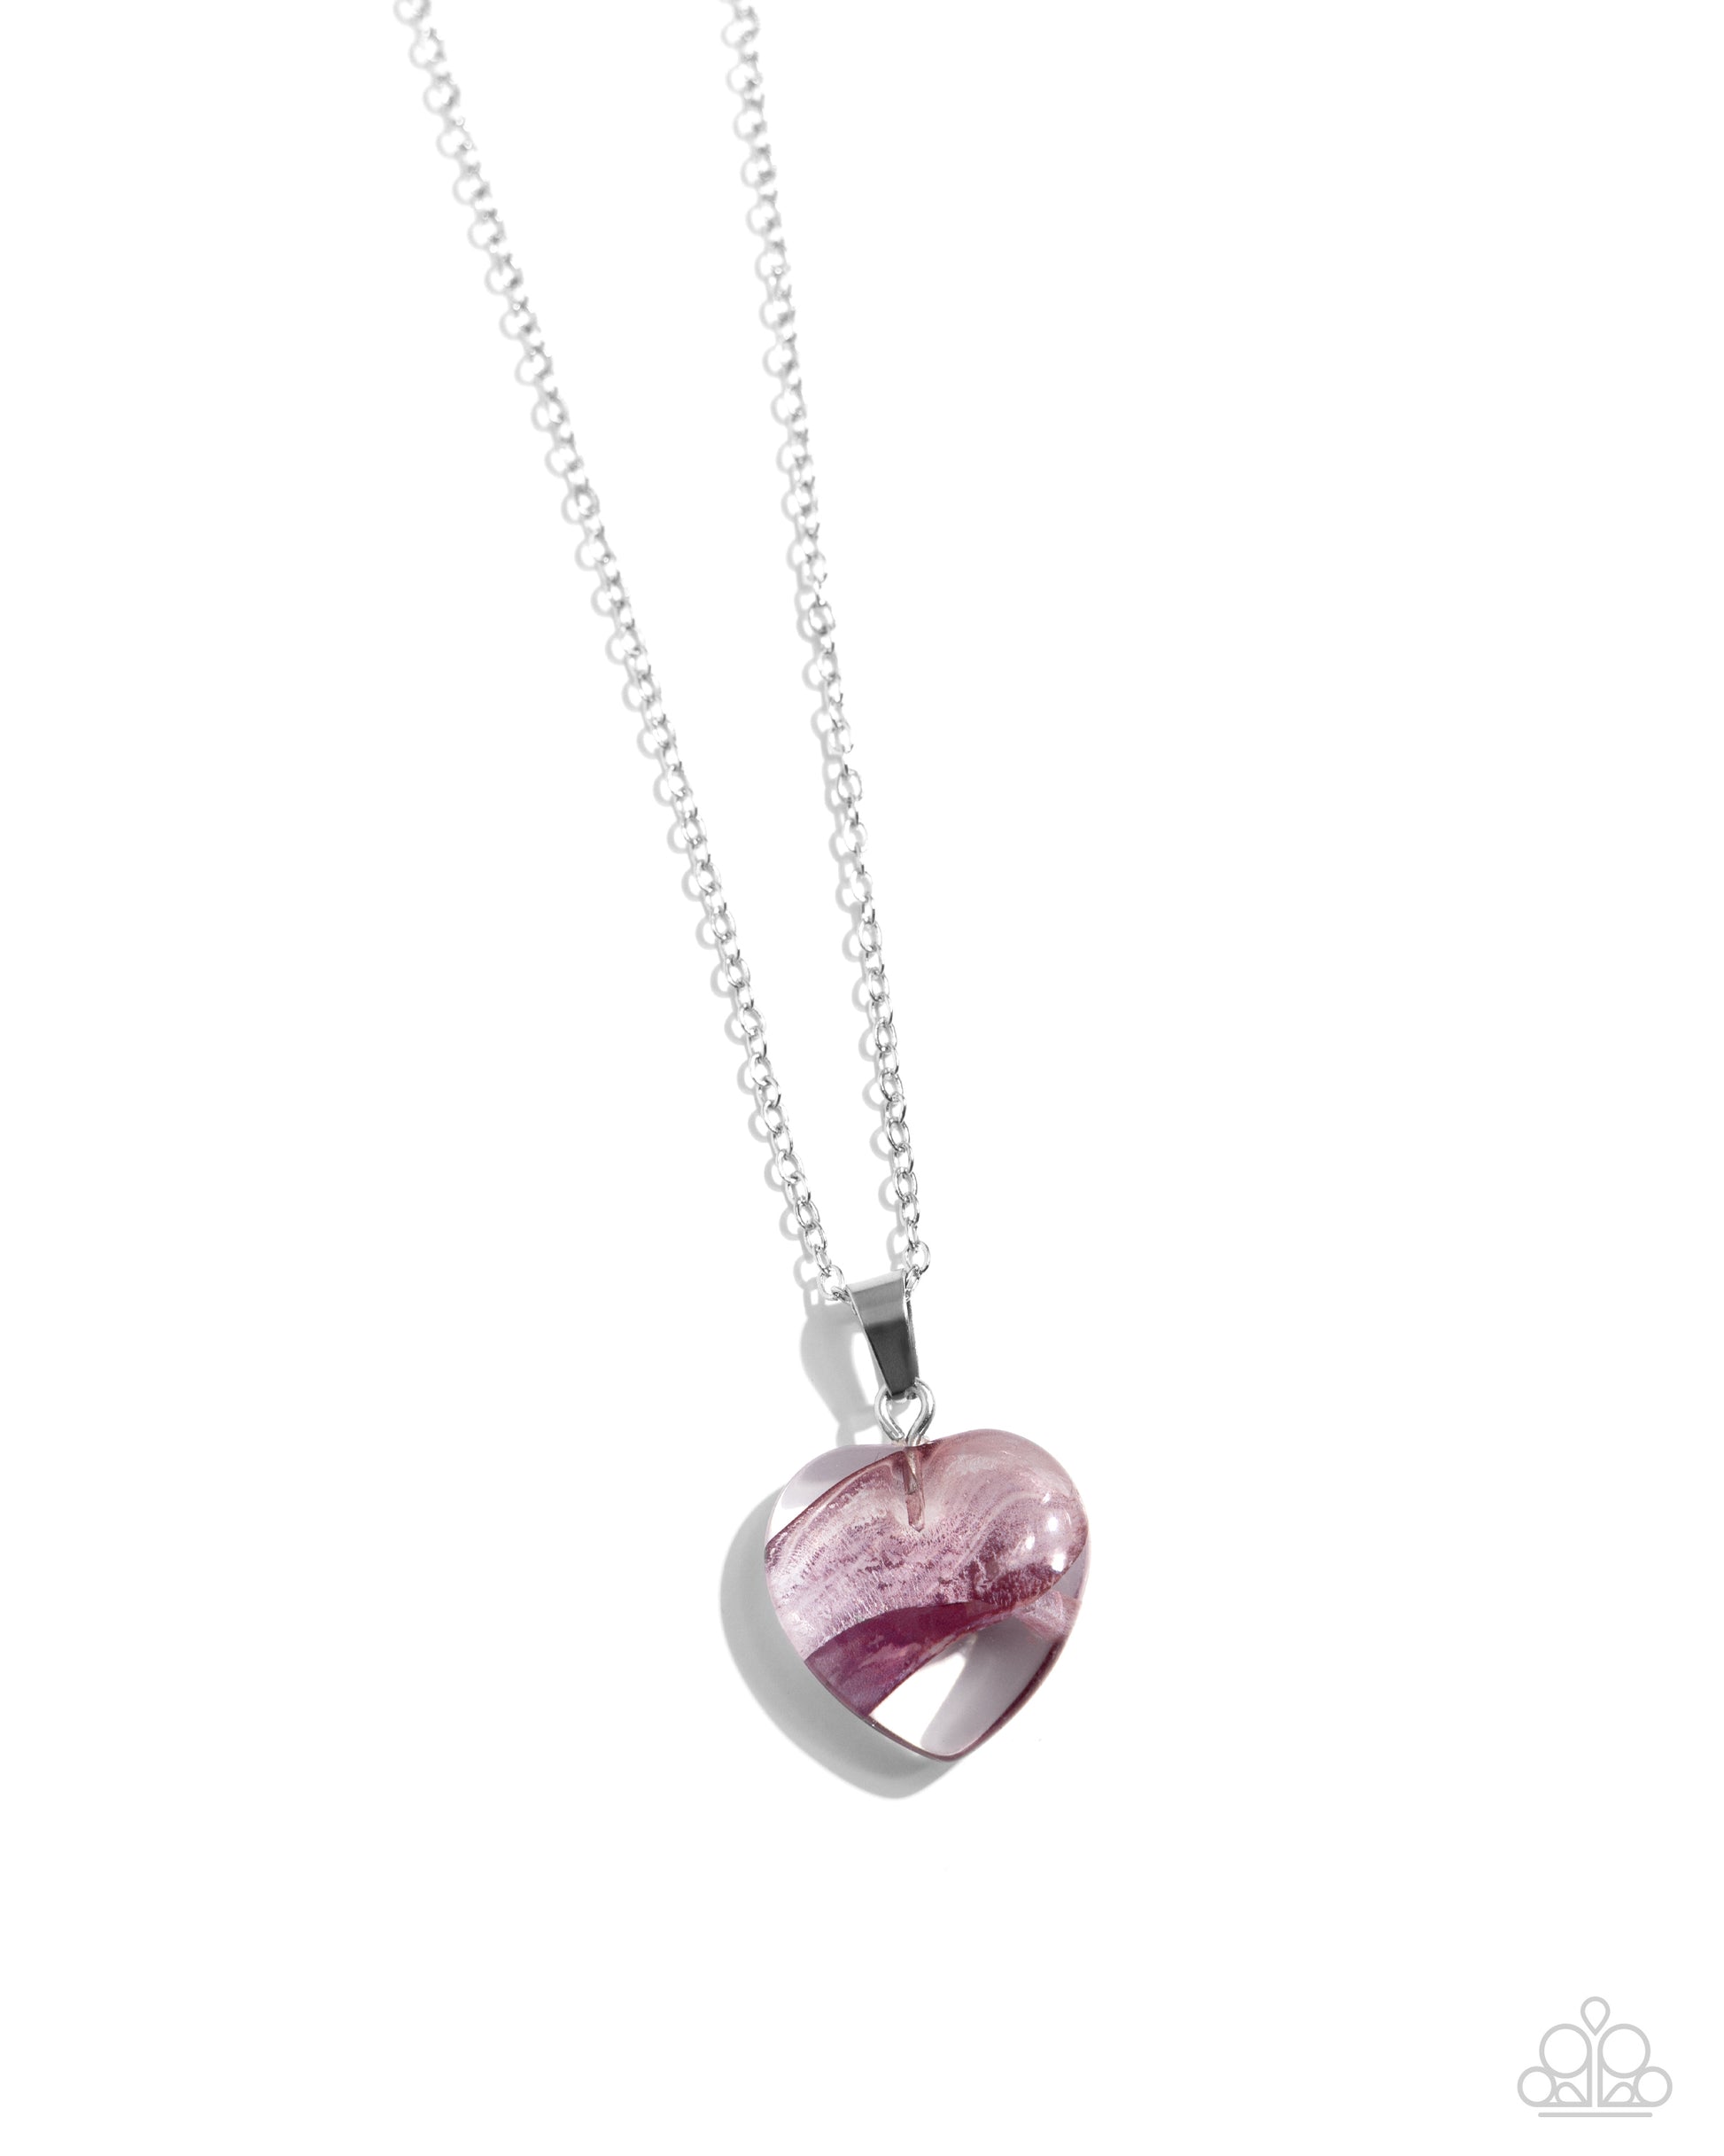 HEART Exhibition Purple Necklace - Paparazzi Accessories Featuring a swirl of purple detail, a clear acrylic heart pendant glides along a dainty silver chain cascading below the neckline for an adorably abstract statement. Features an adjustable clasp closure. Sold as one individual necklace. Includes one pair of matching earrings. SKU: P2DA-PRXX-156XX